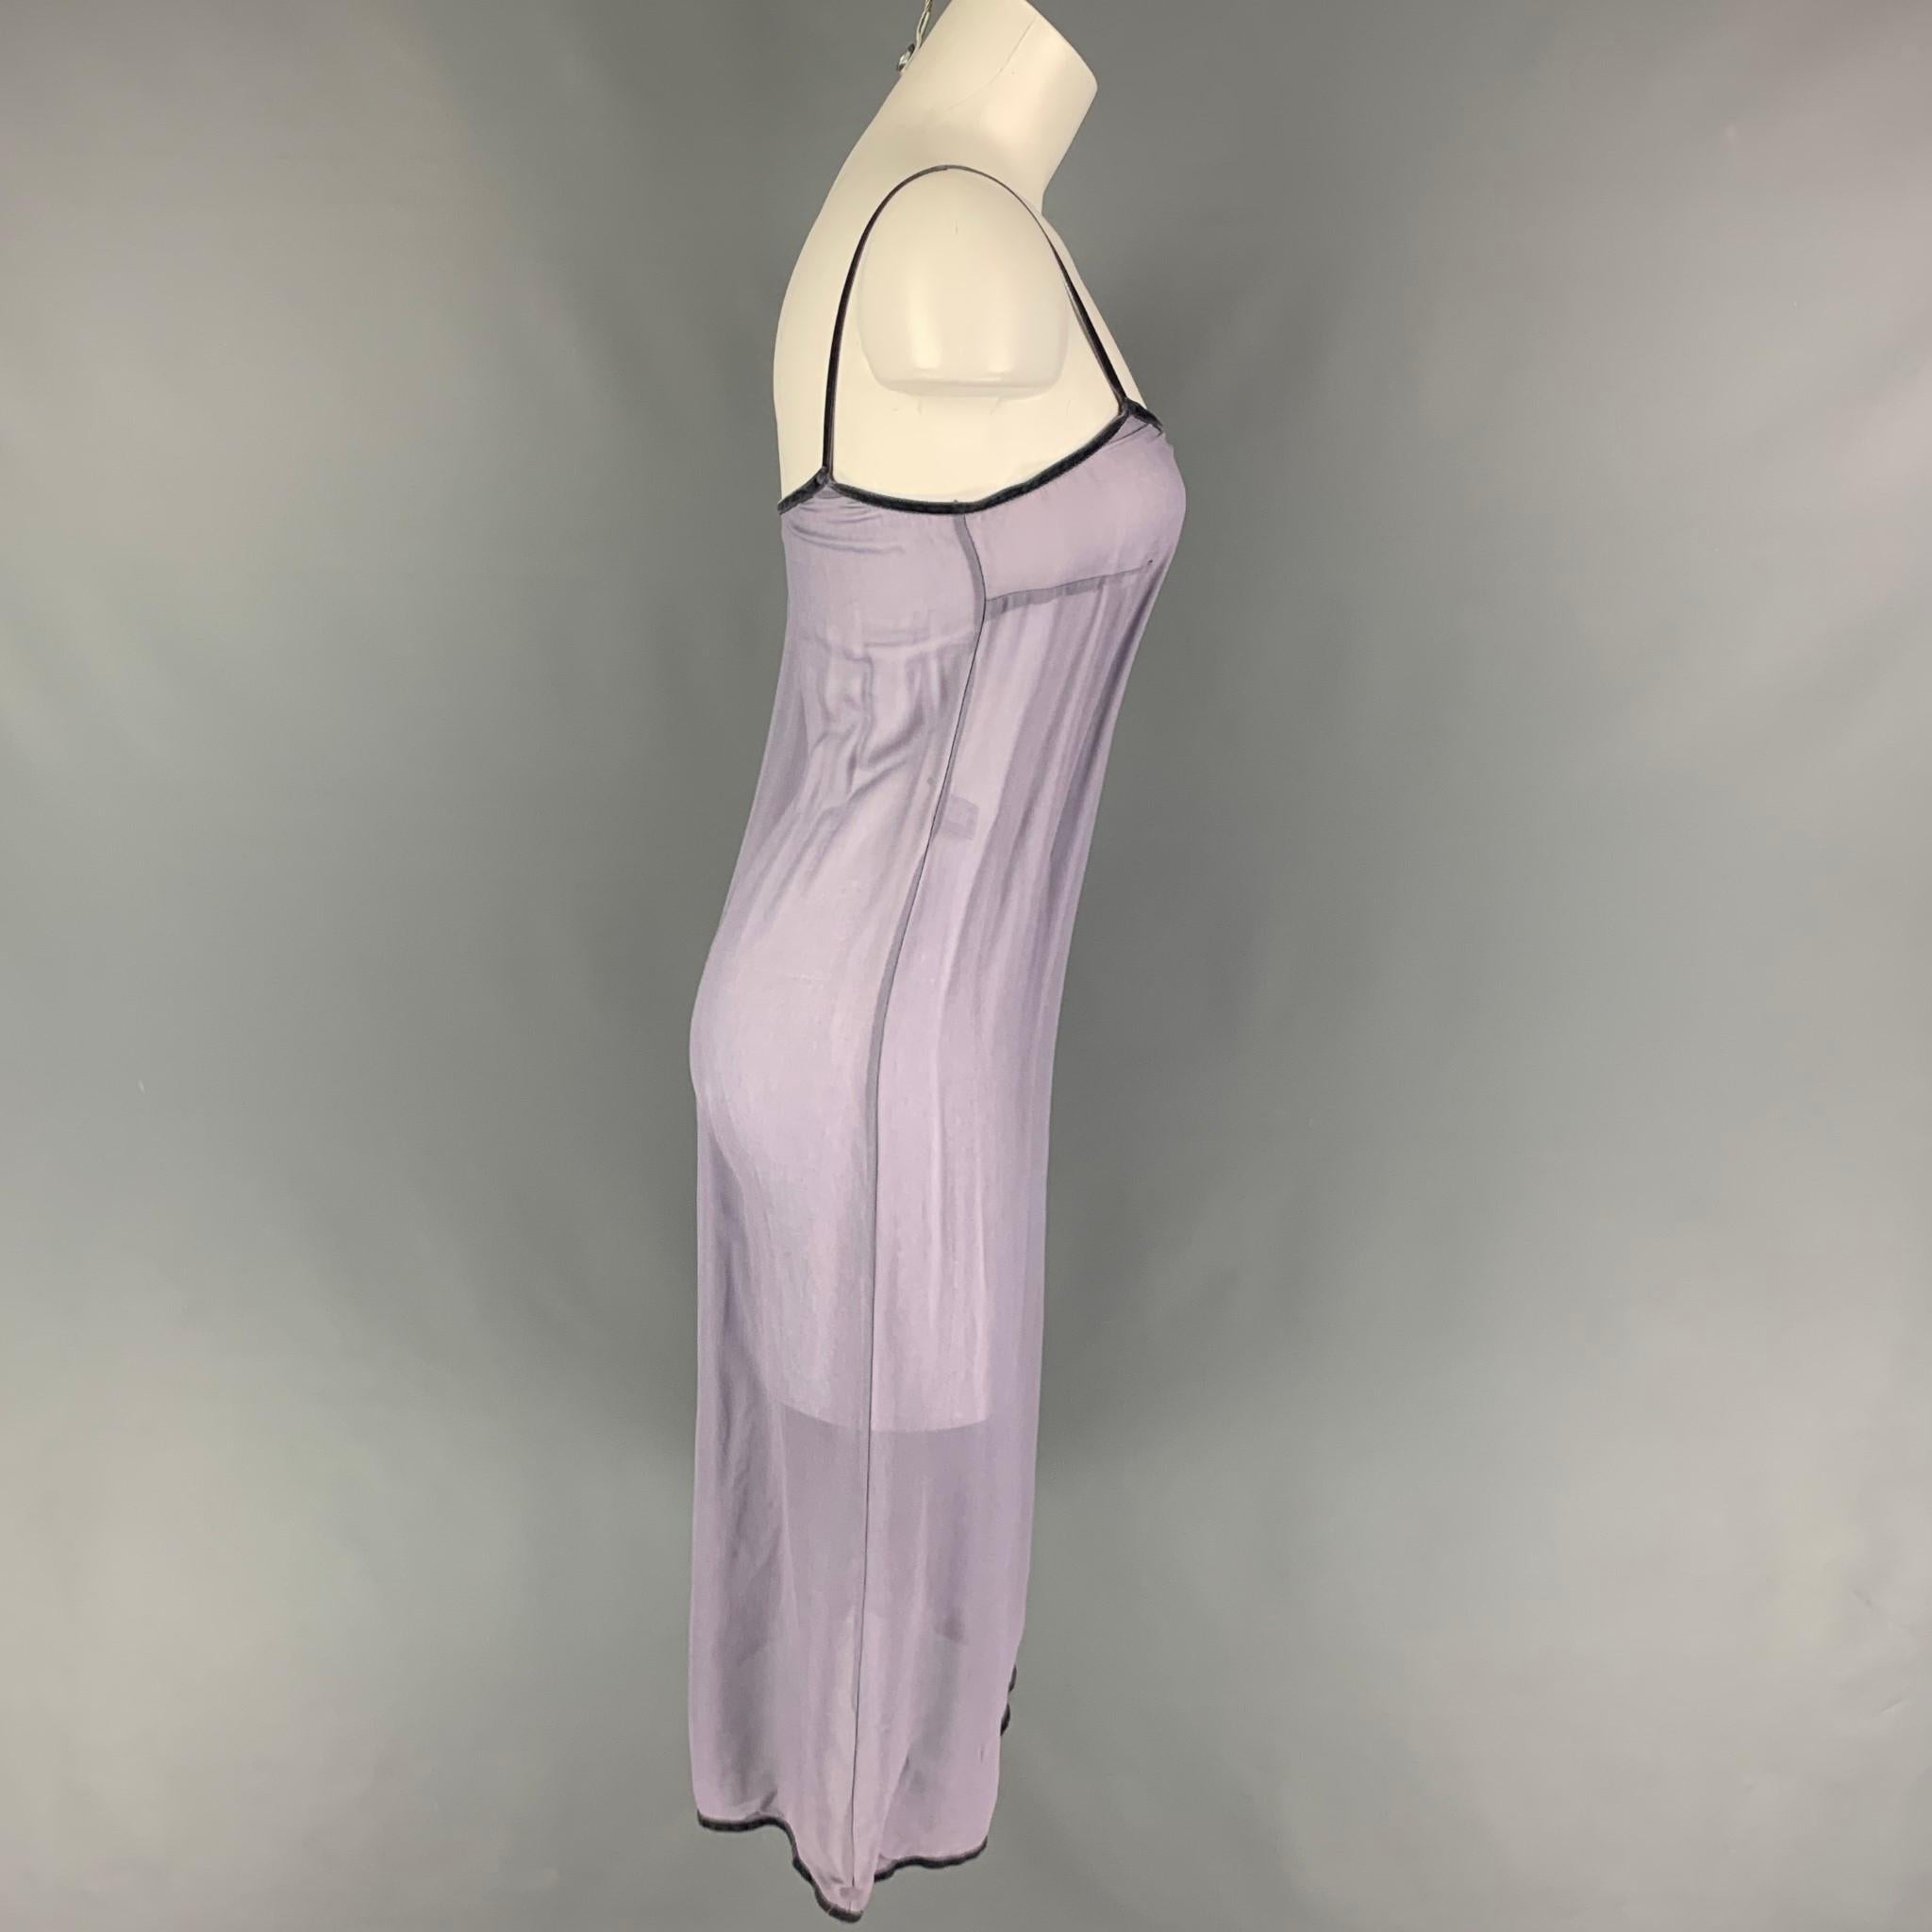 MIU MIU dress comes in a lilac rayon featuring a slip style, spaghetti straps, and a velvet trim. Made in Italy. 

Very Good Pre-Owned Condition.
Marked: S

Measurements:

Bust: 28 in.
Hip: 36 in.
Length: 33.5 in.